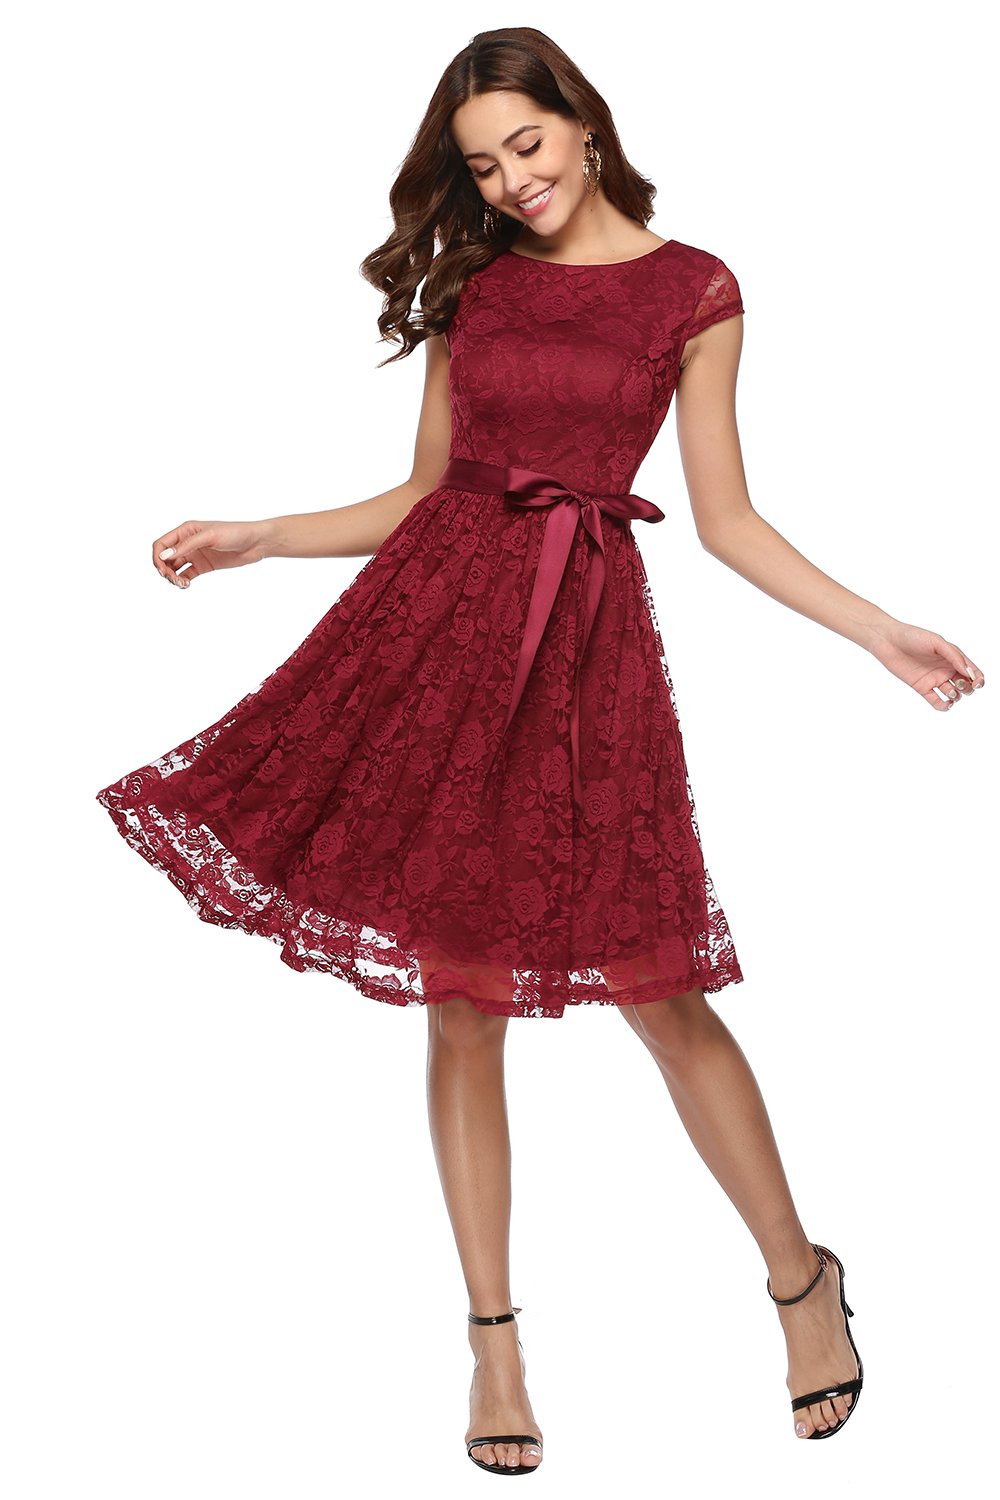 Dark Red Belted Lace Dress